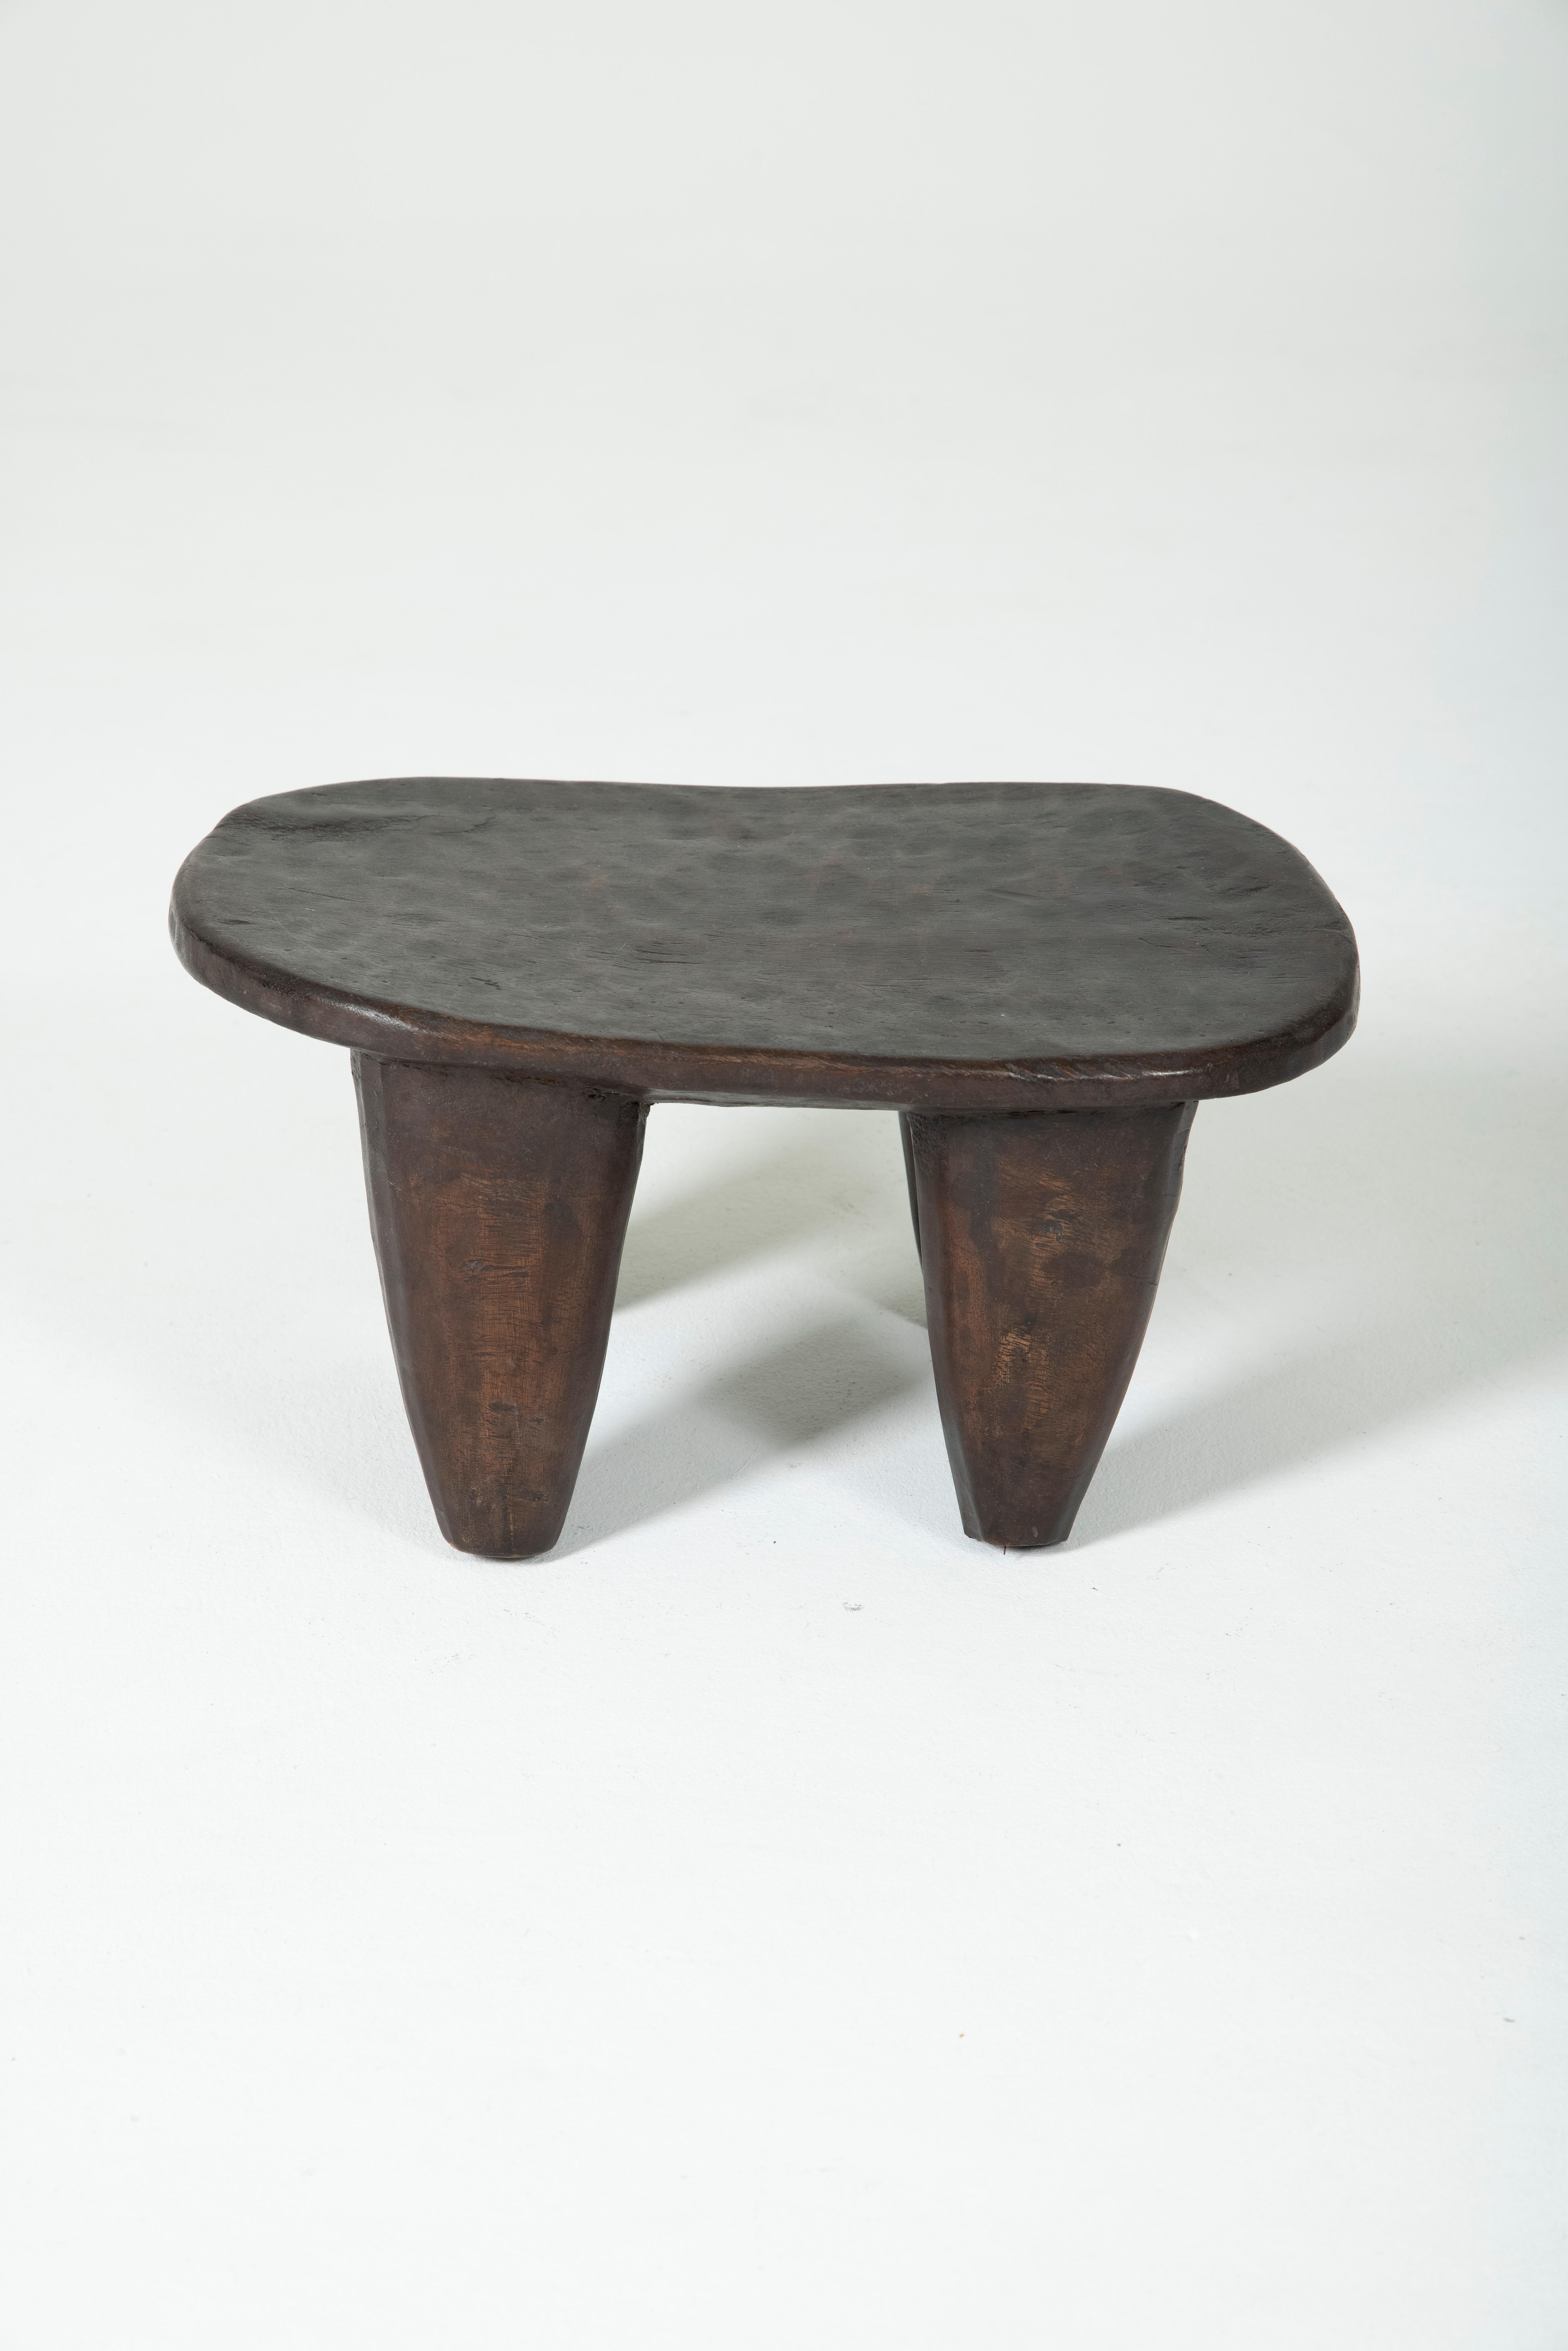 Low stool senufo. Composed of a large seat and 4 feet. Beautiful patina of wood. Very good condition.